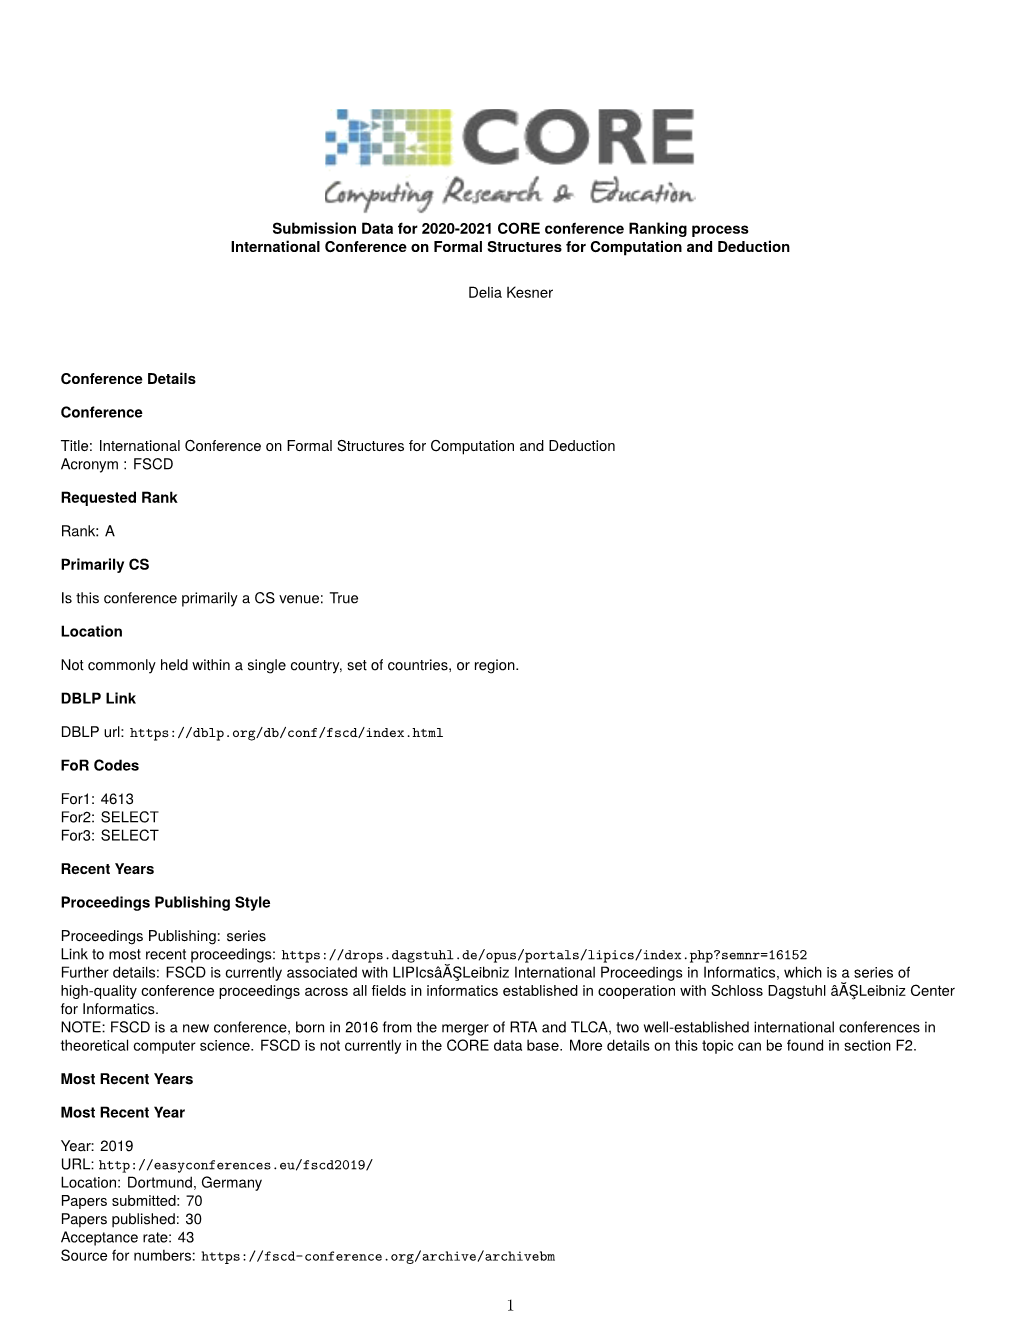 Submission Data for 2020-2021 CORE Conference Ranking Process International Conference on Formal Structures for Computation and Deduction